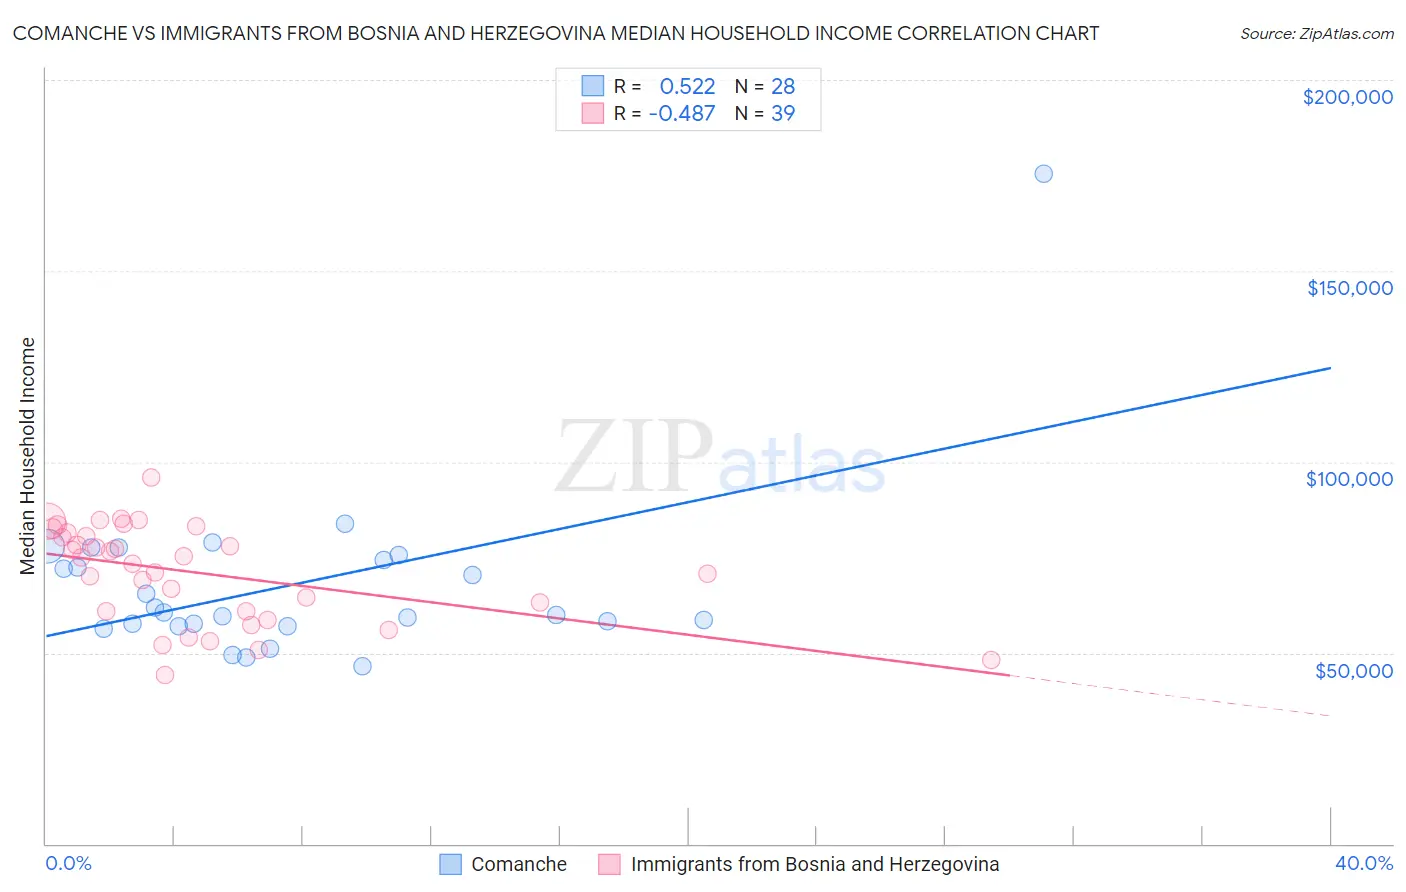 Comanche vs Immigrants from Bosnia and Herzegovina Median Household Income